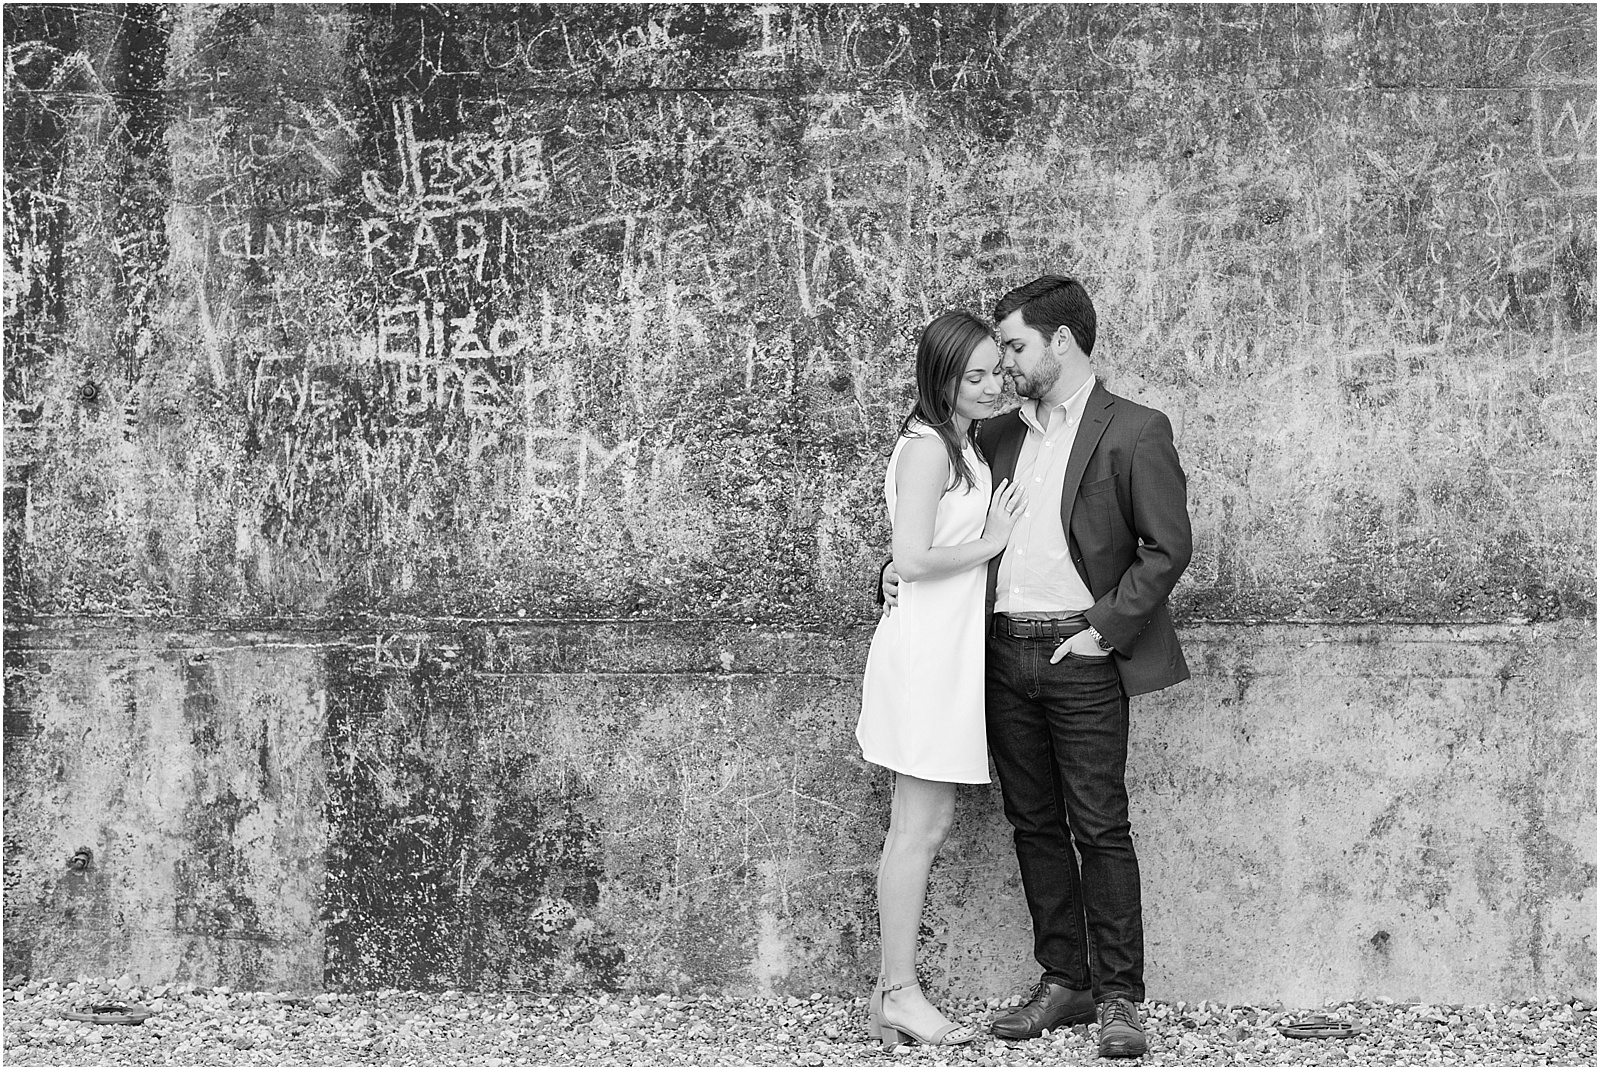 michelle and sara photography, saxapahaw, the rivermill lofts, chic engagement outfit, chic engagement session, saxapahaw engagement session, navy blue suit, brick arched backgroung, north carolina engagement, nc engagement, nc engagement photographer, 2018 bride, 2018 wedding, black and white, black and white photography